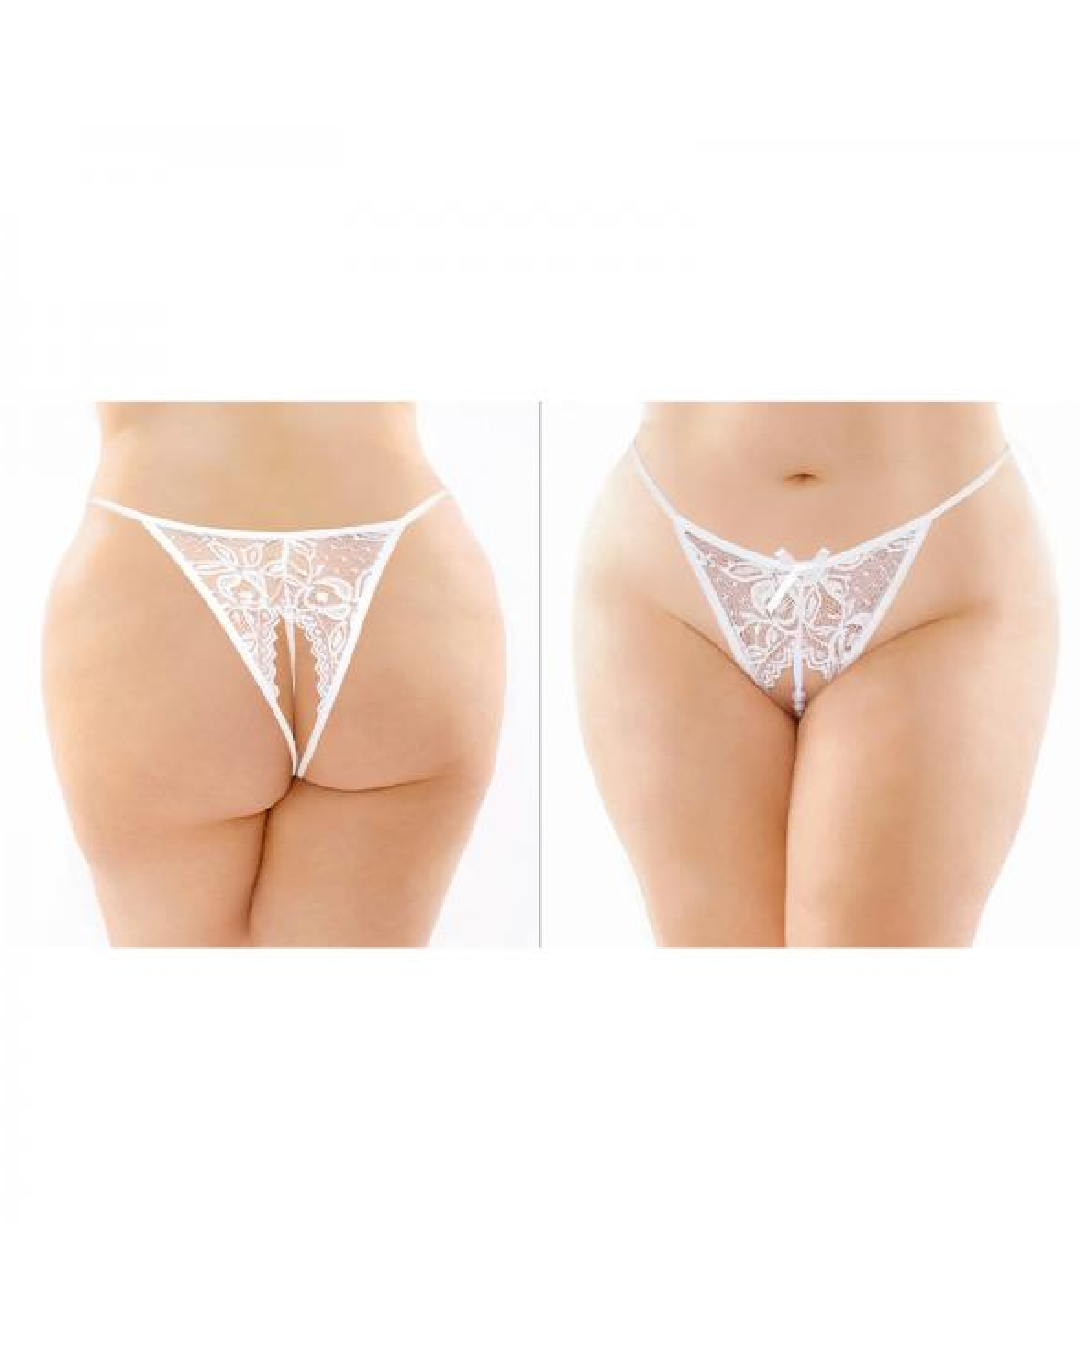 Calla Crotchless White Lace Pearl Panty - Queen Size front and back view 